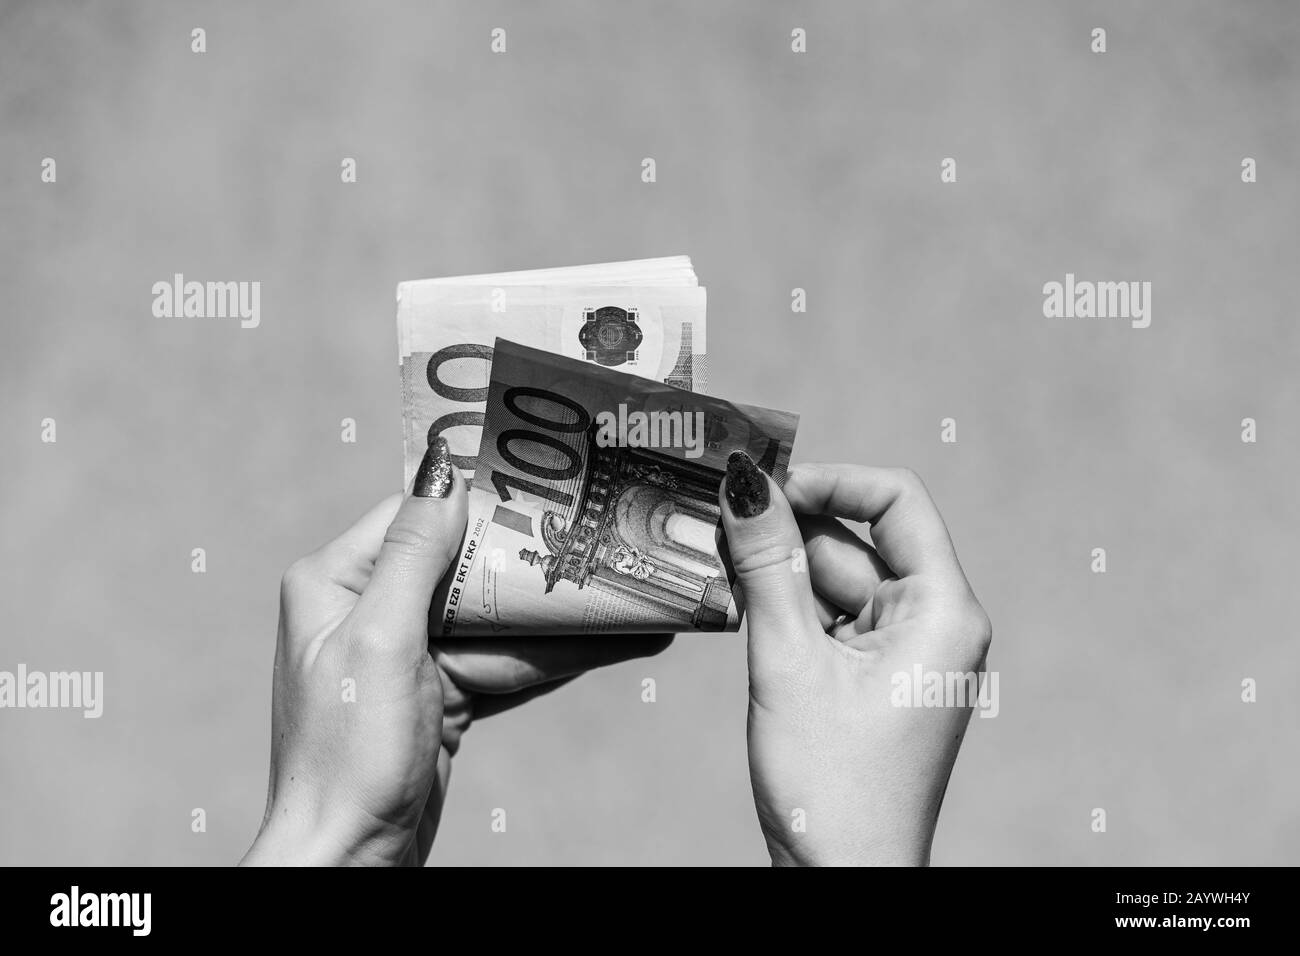 Hand couting holding and showing euro money or giving money. World money concept, 100 EURO banknotes EUR currency isolated with copy space. Concept of Stock Photo